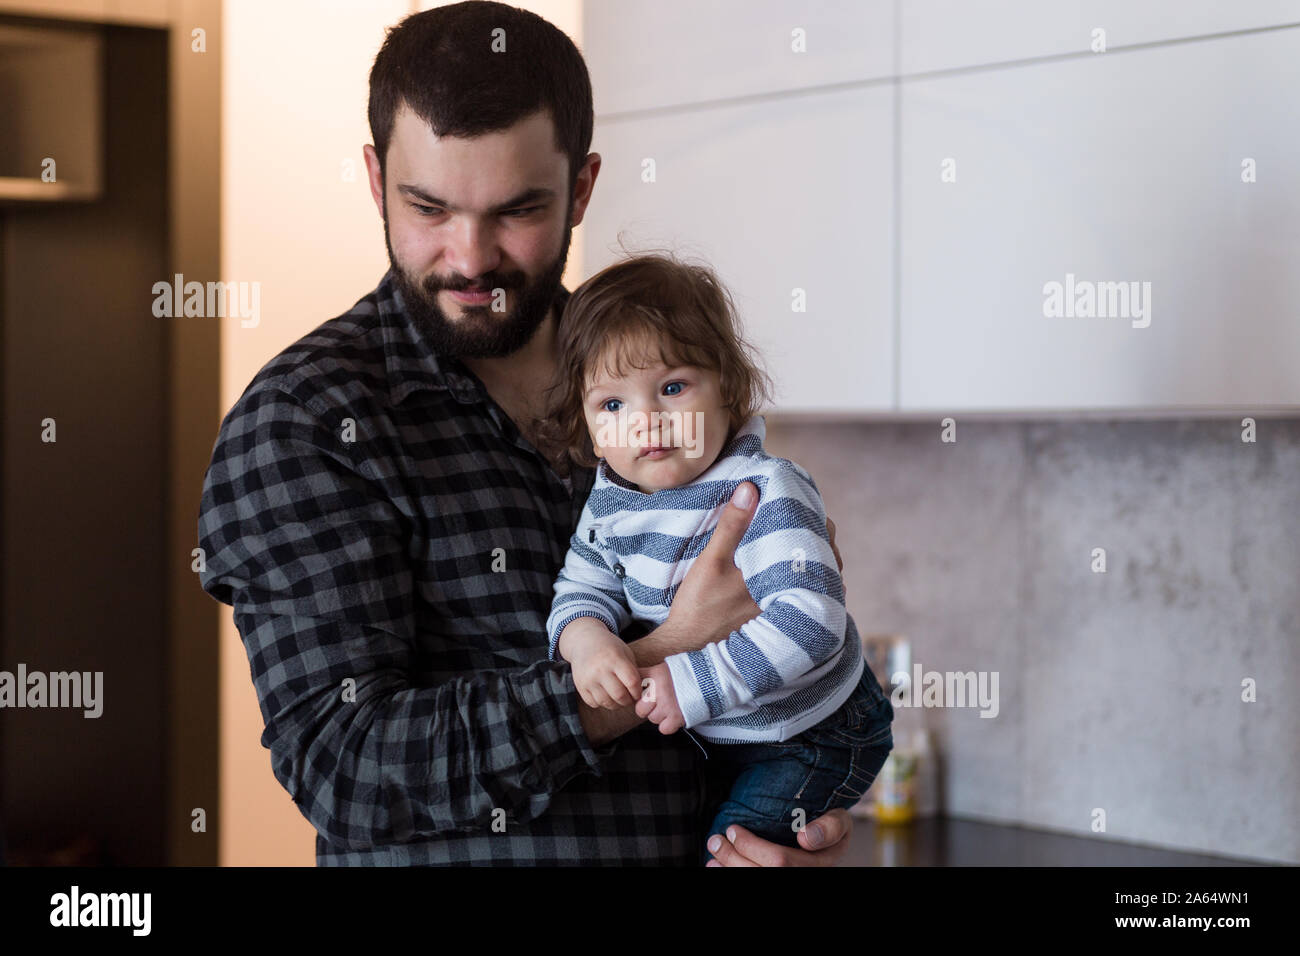 Father holding 8-month-old son, burping him after feeding. Stock Photo